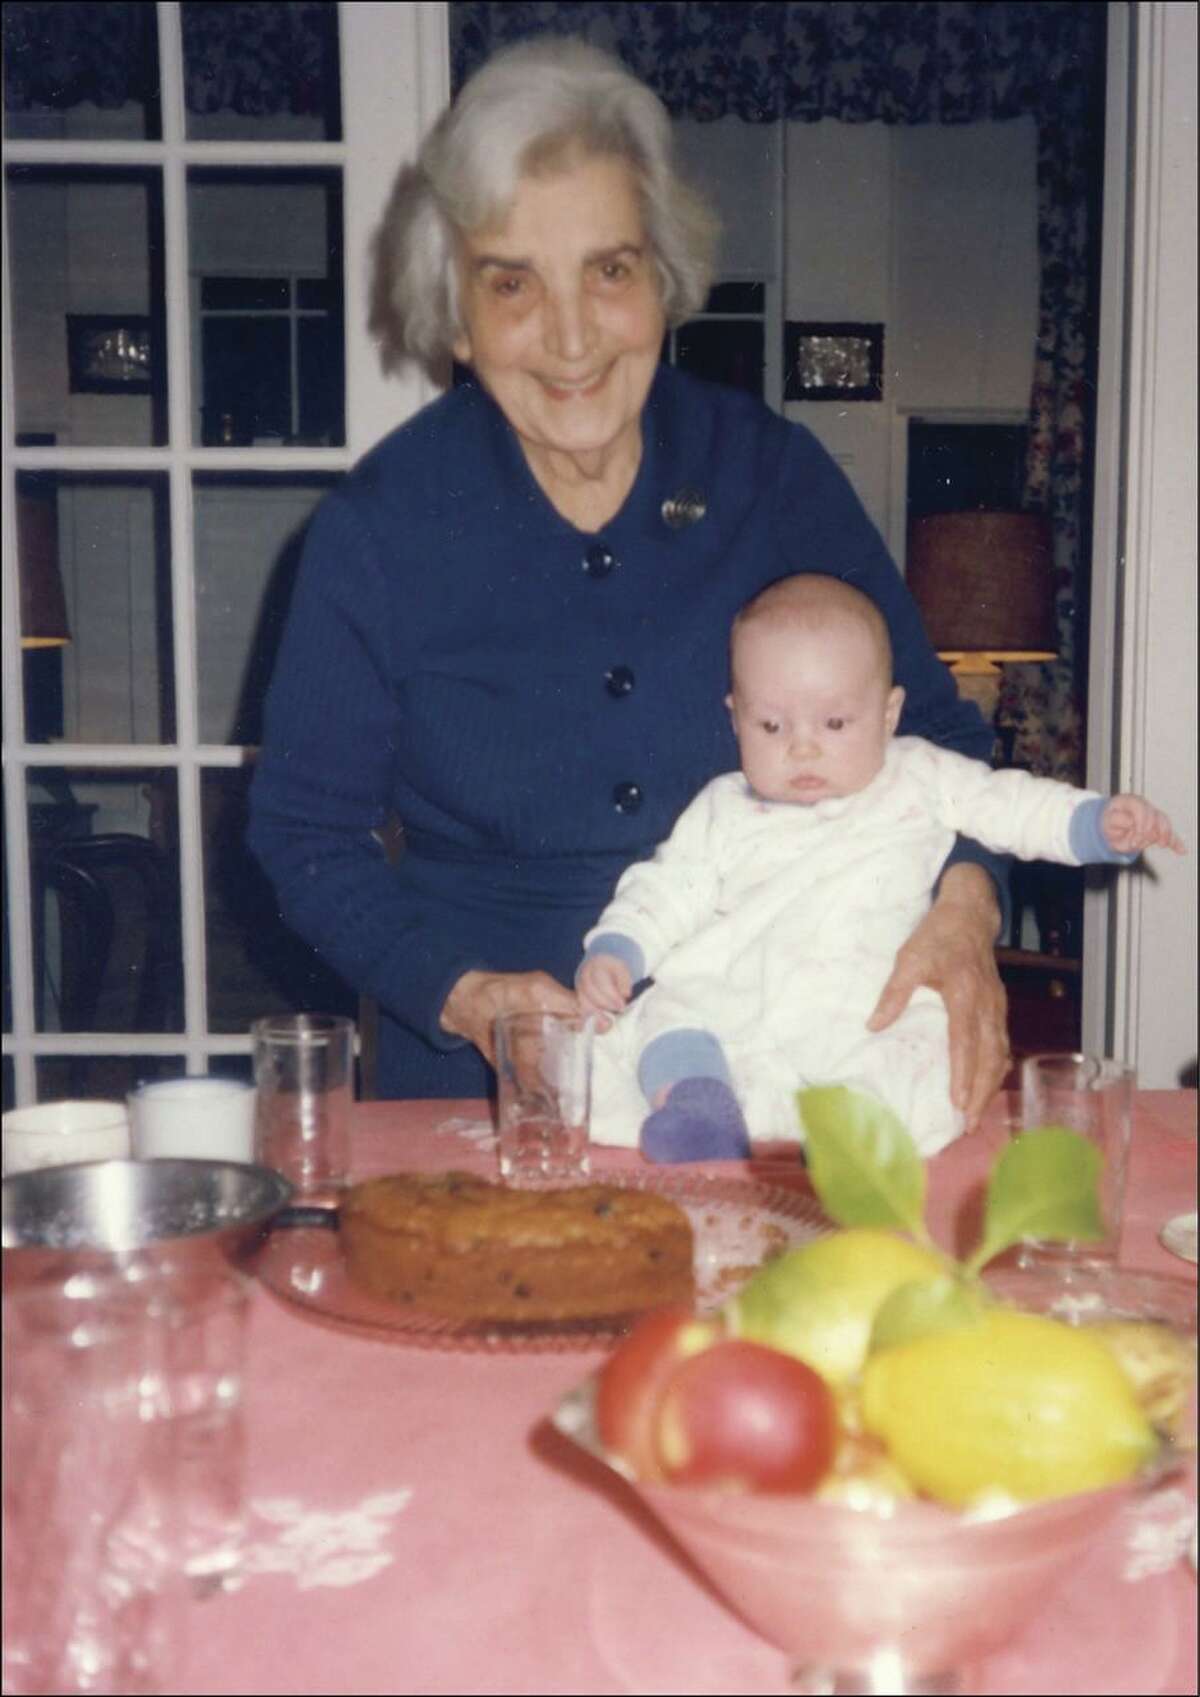 Ralph Nader’s parents grew up in Lebanon and used family mealtime as an opportunity to discuss important topics with their four children, while sharing Lebanese traditions of food, culture and philosophy. Nader’s mother, Rose, who always cooked from scratch, is seen here with her great-grandson, Adnaan Stumo.